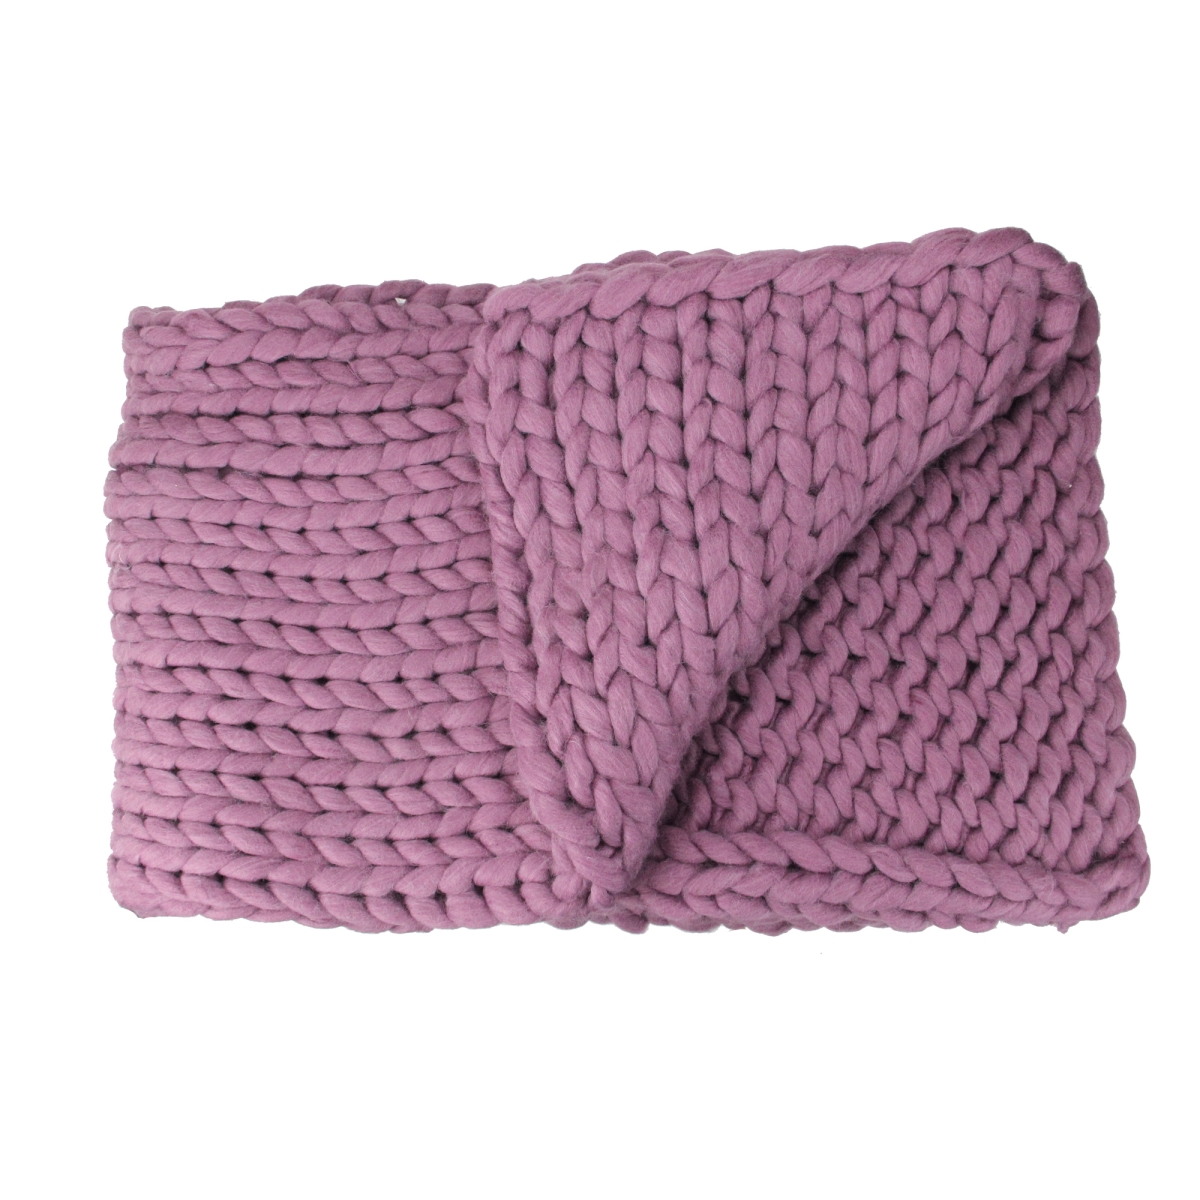 32913593 60 X 50 In. Dark Purple Cable Knit Plush Throw Blanket